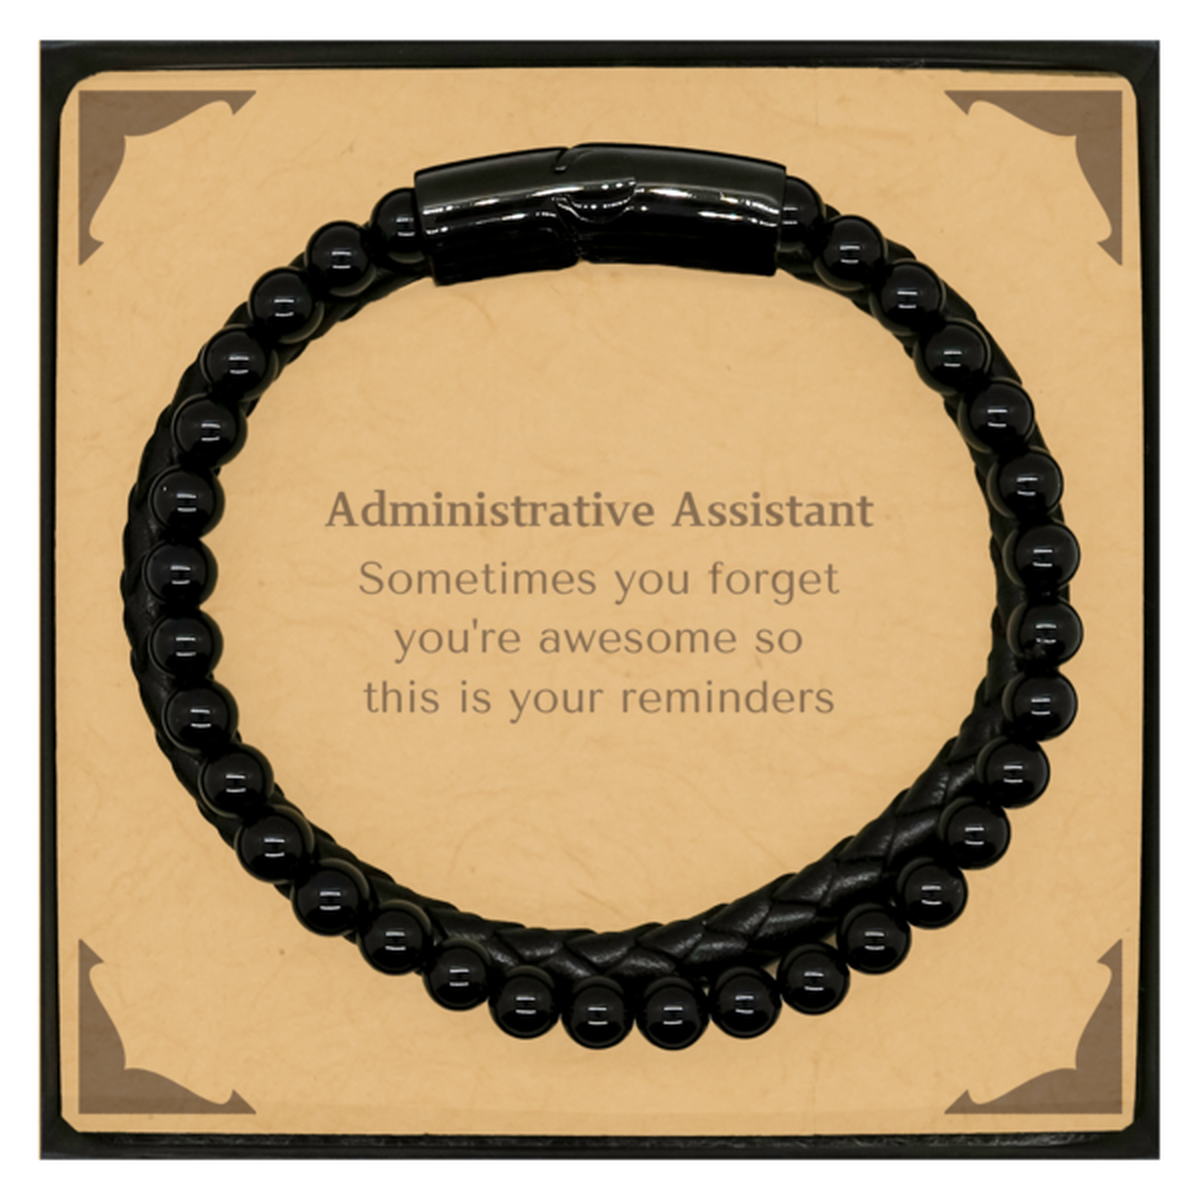 Sentimental Administrative Assistant Stone Leather Bracelets, Administrative Assistant Sometimes you forget you're awesome so this is your reminders, Graduation Christmas Birthday Gifts for Administrative Assistant, Men, Women, Coworkers